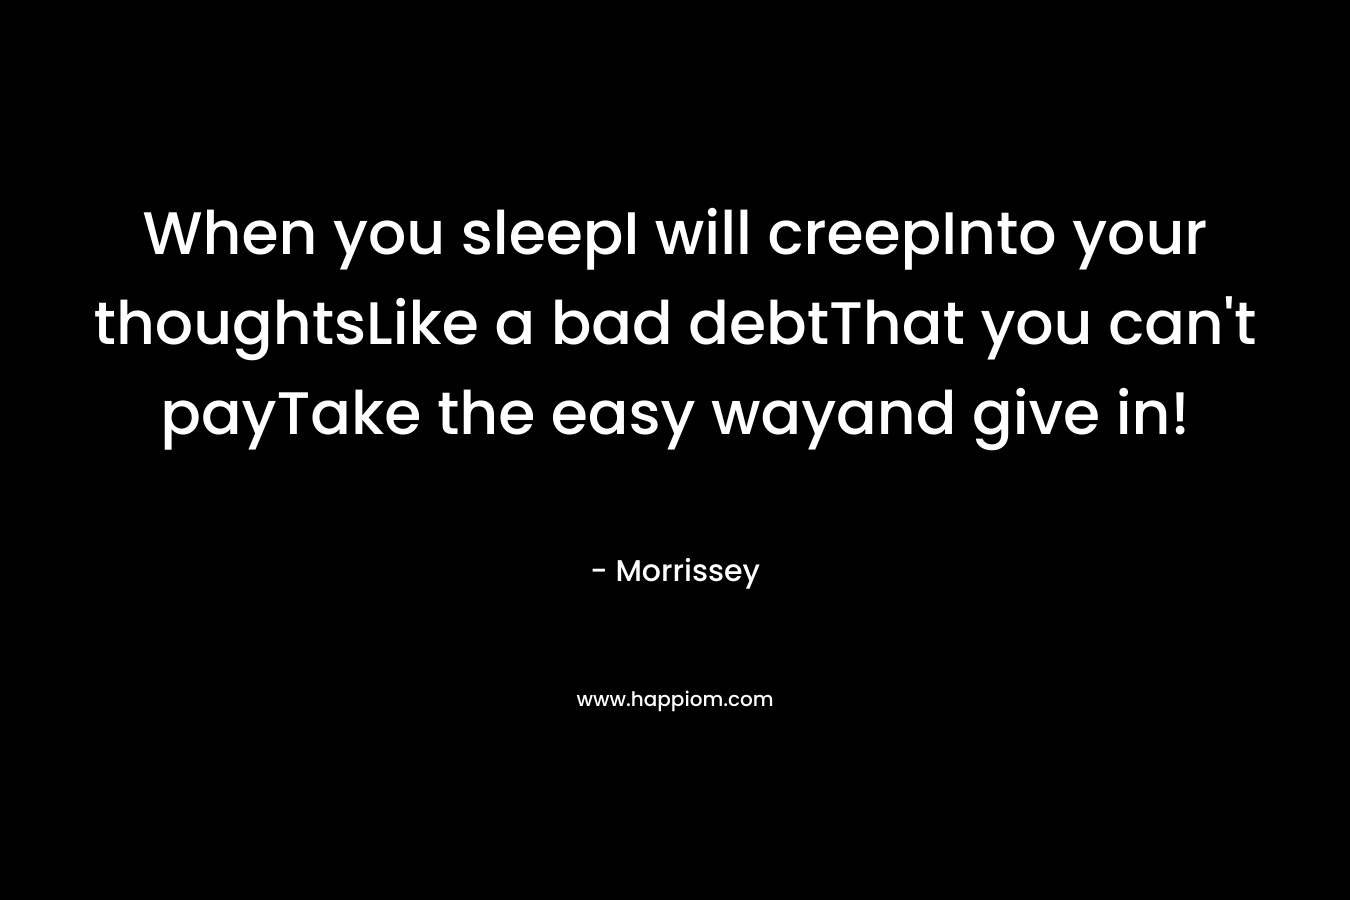 When you sleepI will creepInto your thoughtsLike a bad debtThat you can’t payTake the easy wayand give in! – Morrissey